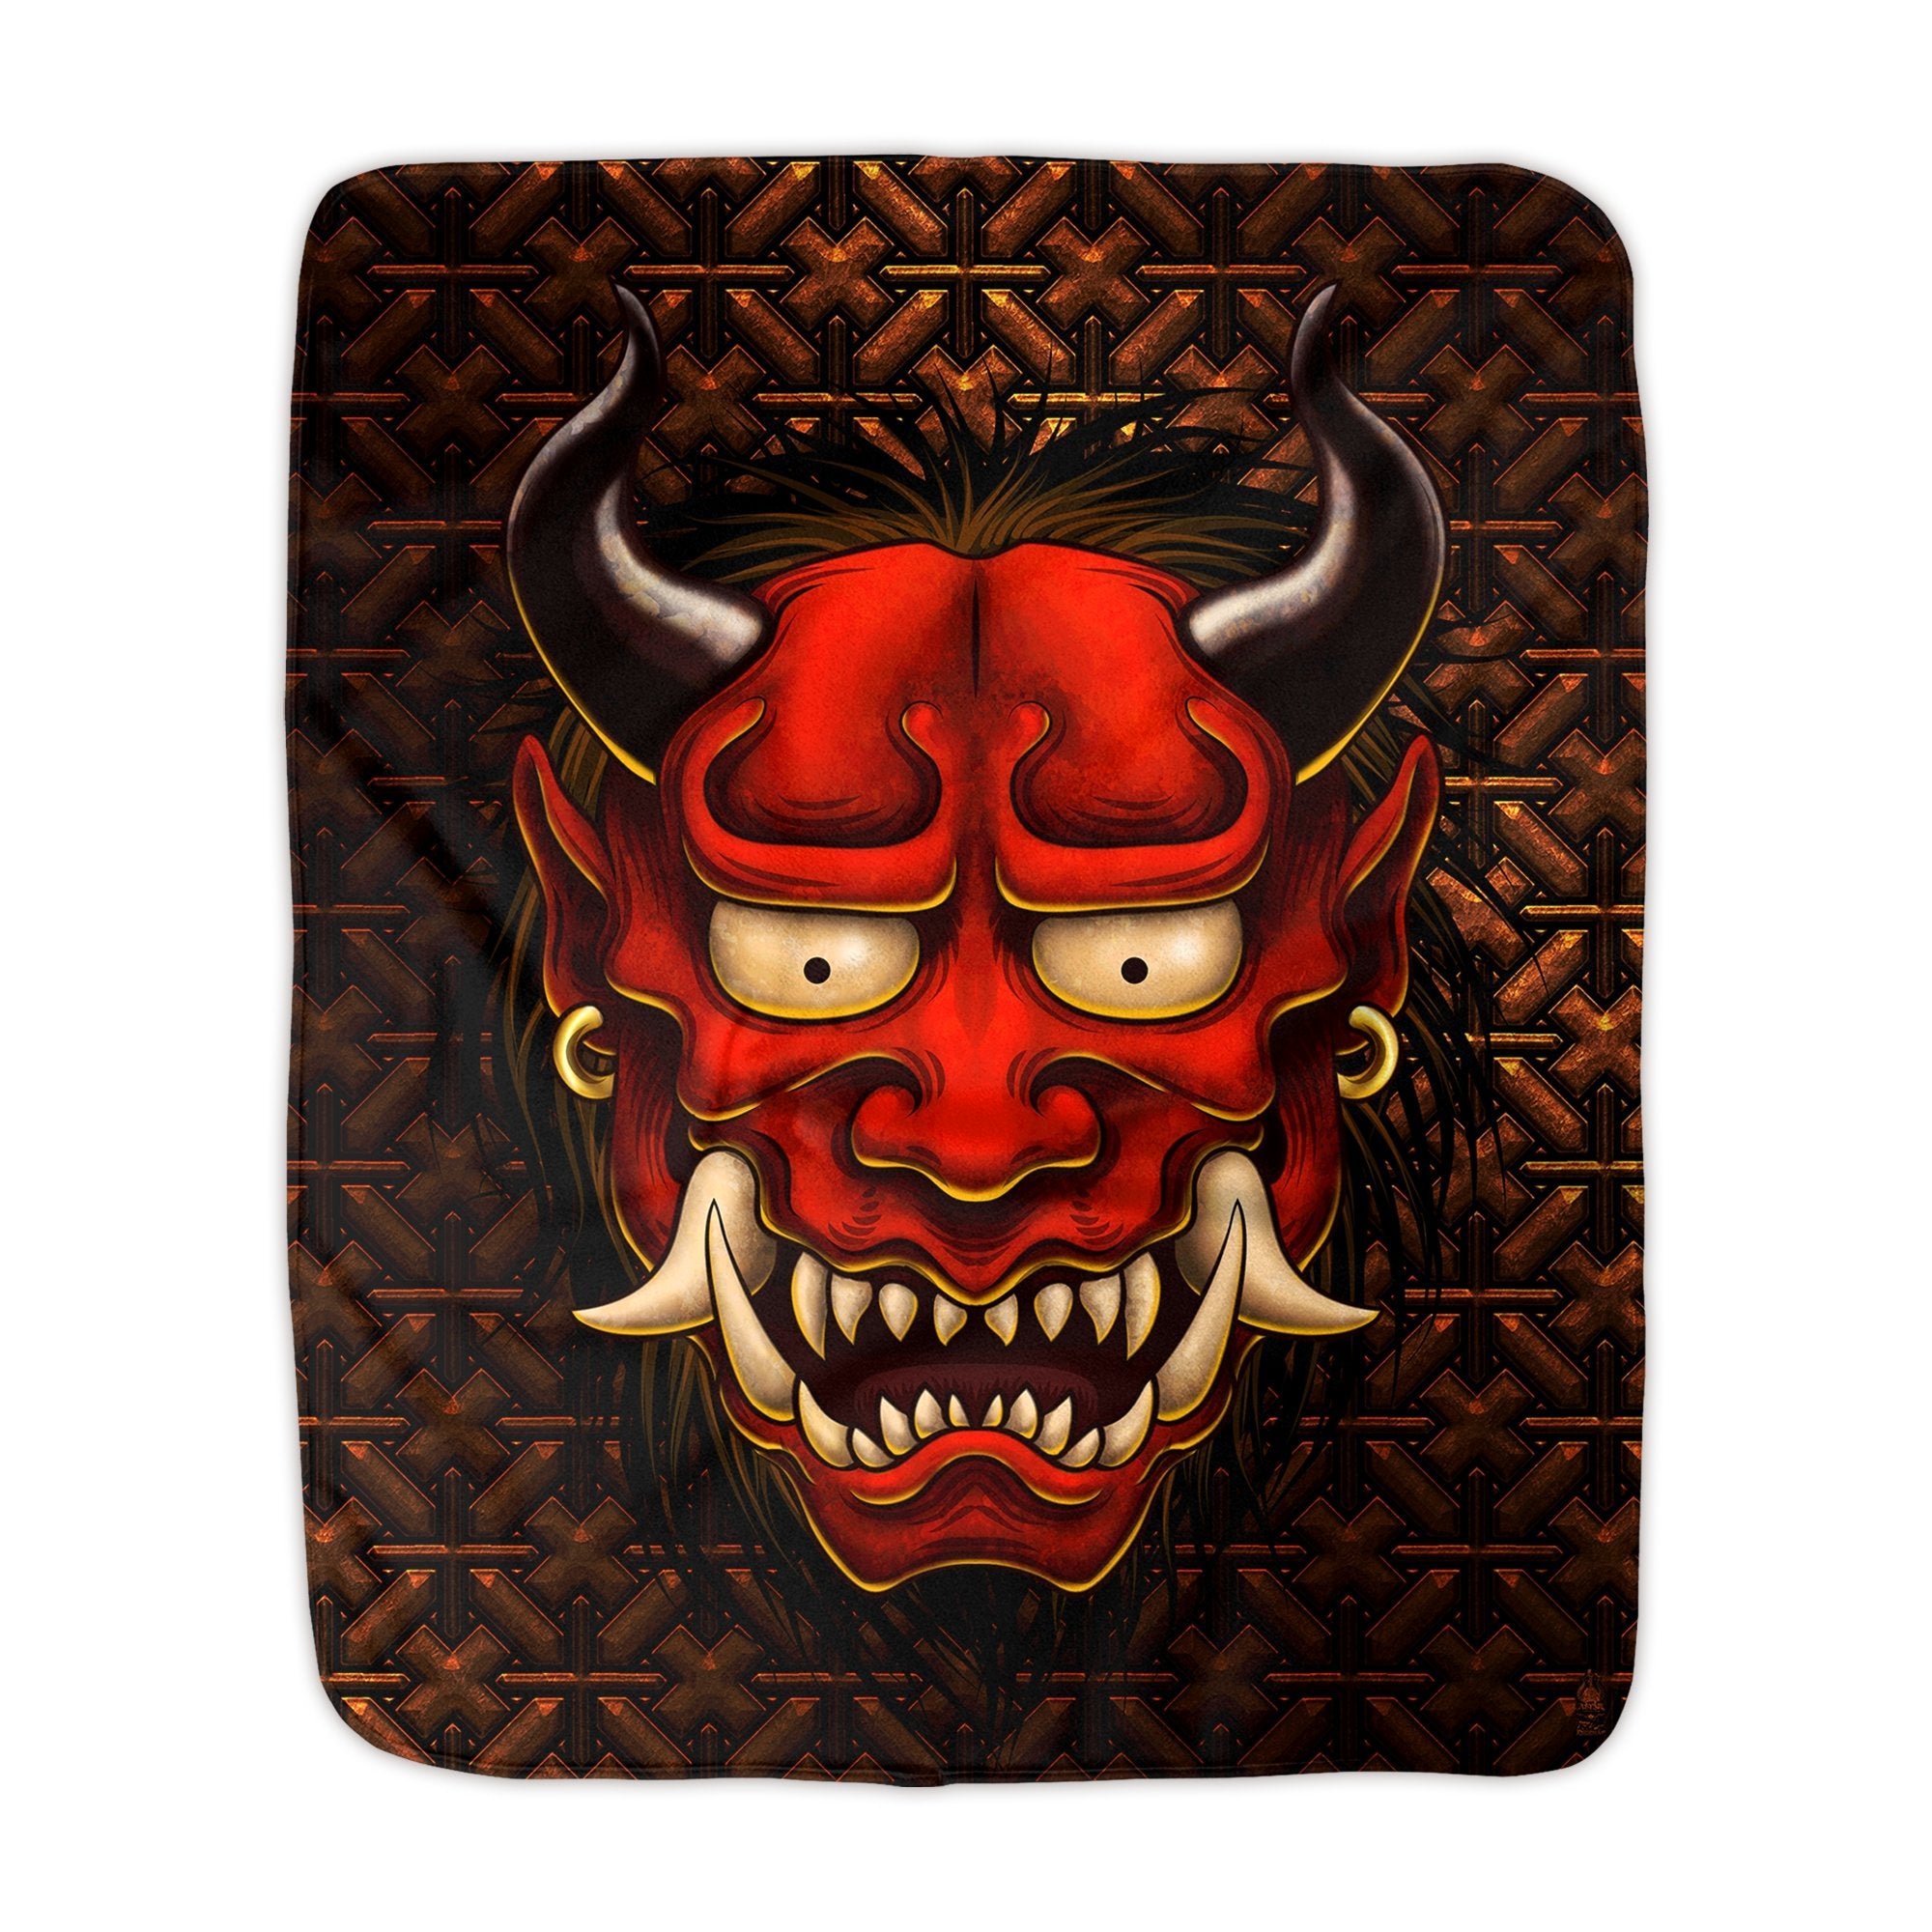 Oni Throw Fleece Blanket, Japanese Demon, Alternative Home Decor, Eclectic and Funky Gift - Red - Abysm Internal